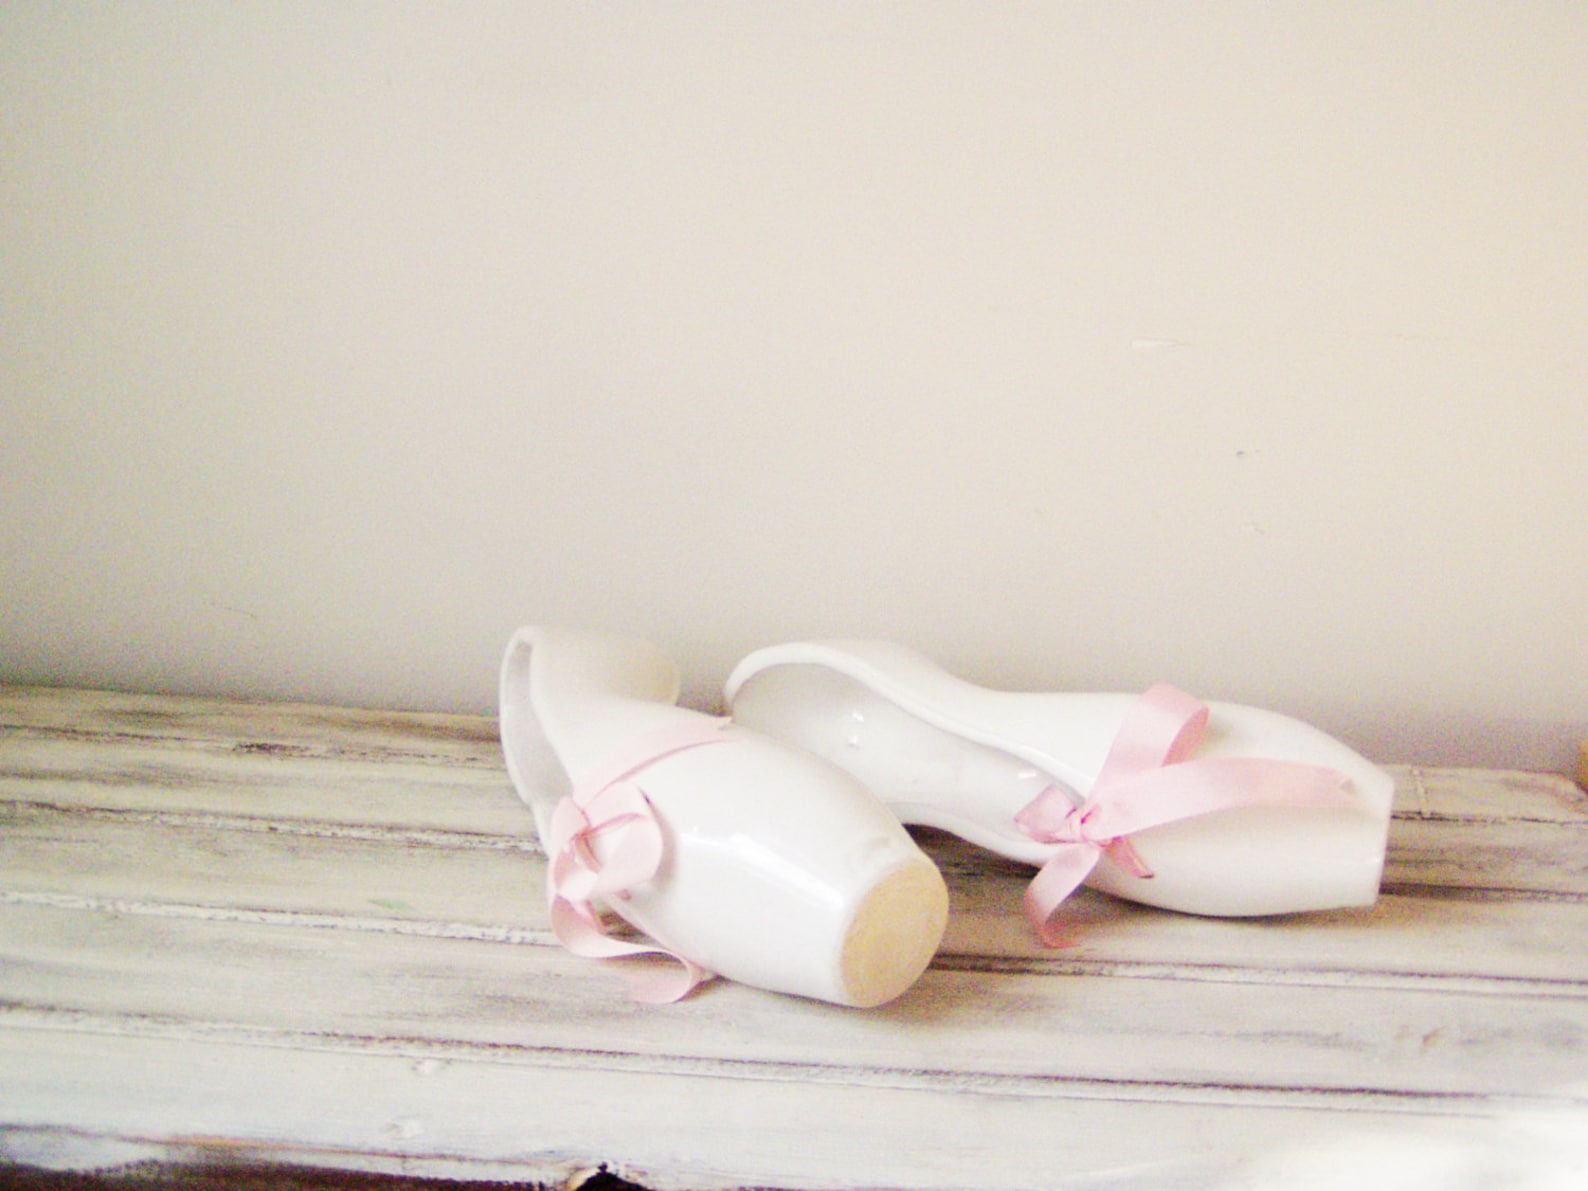 ballerina shoes sculpture, ceramic ballerina shoes of high fire, stoneware clay in milky white with satin, pink ribbons, ballet